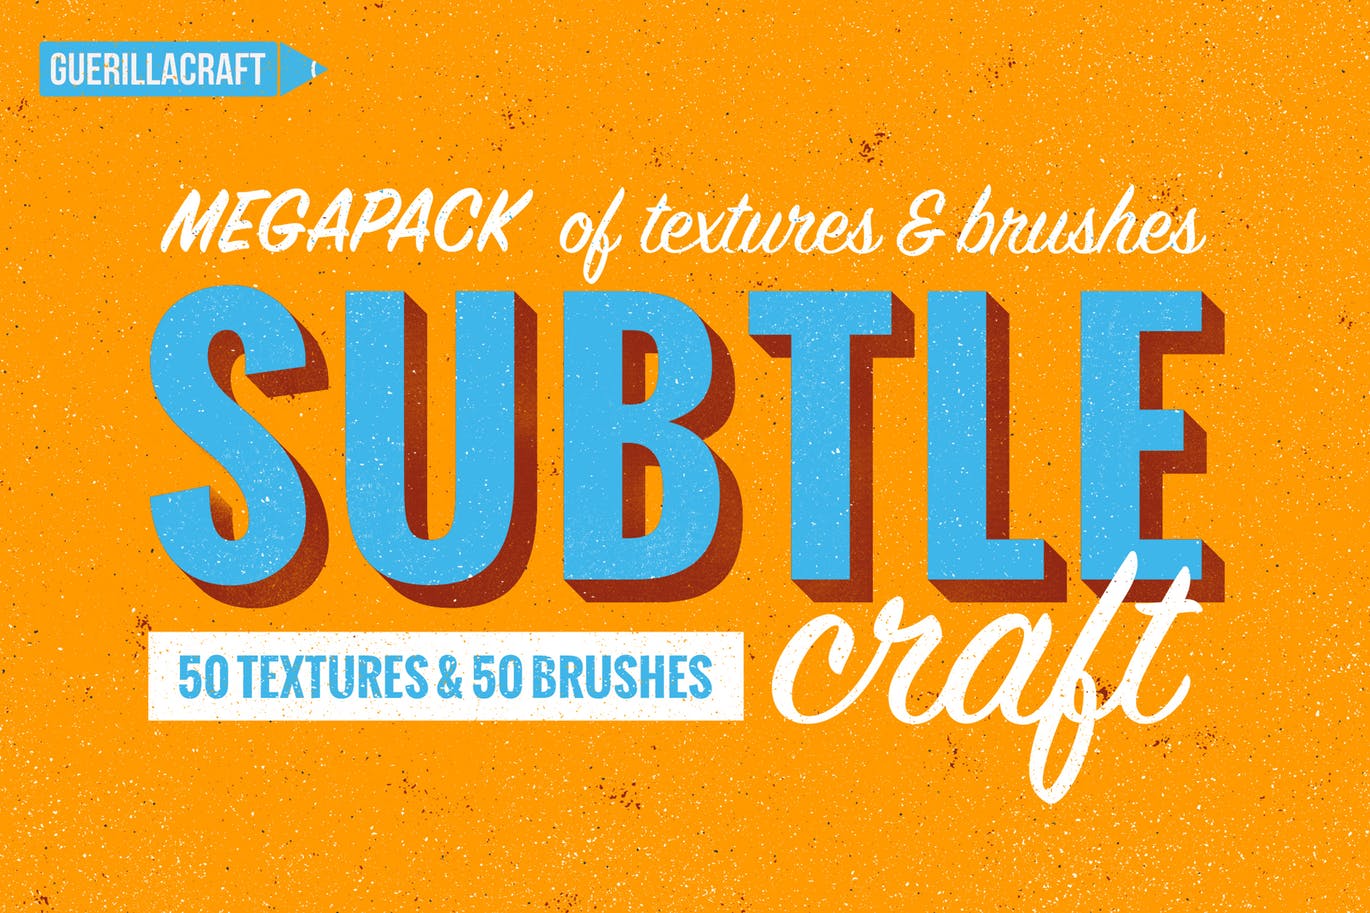 Subtle textures and brushes for photoshop